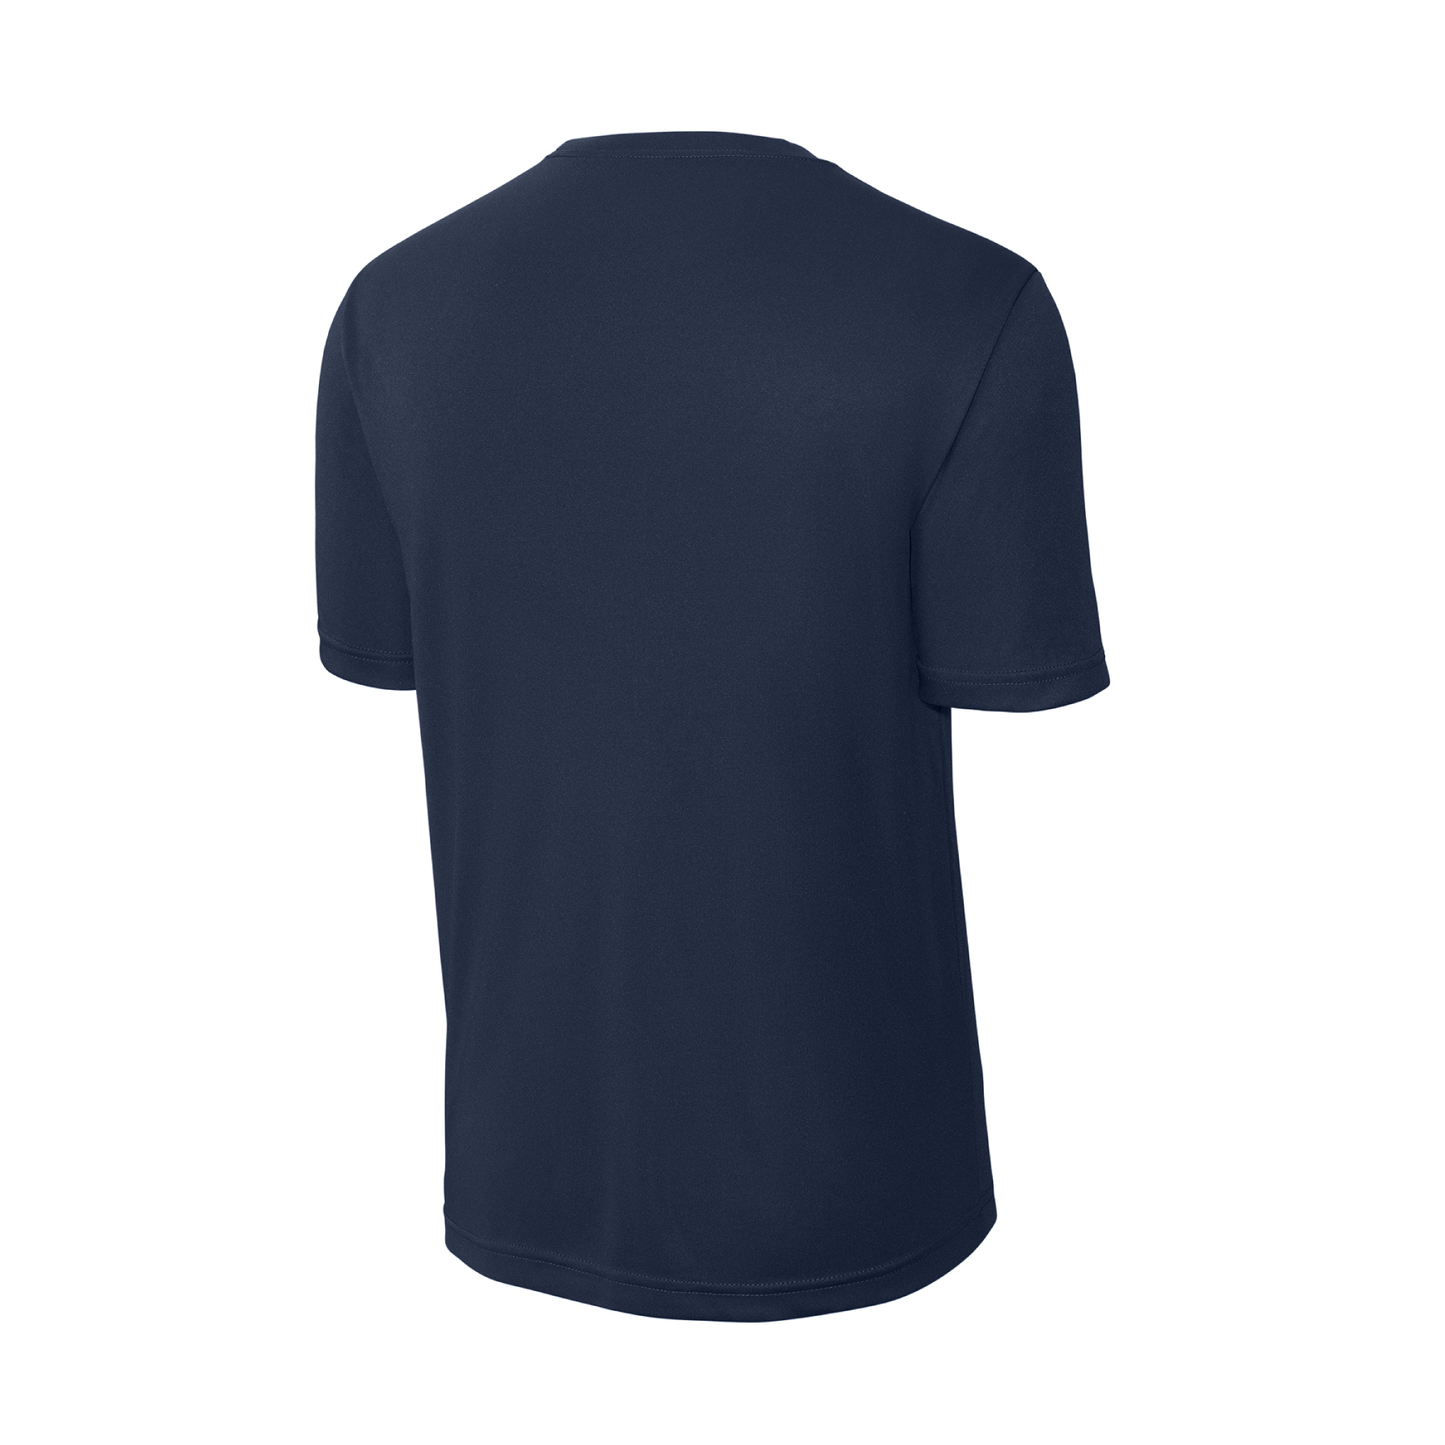 FLA Blue Claws - Men's Performance SS Tee